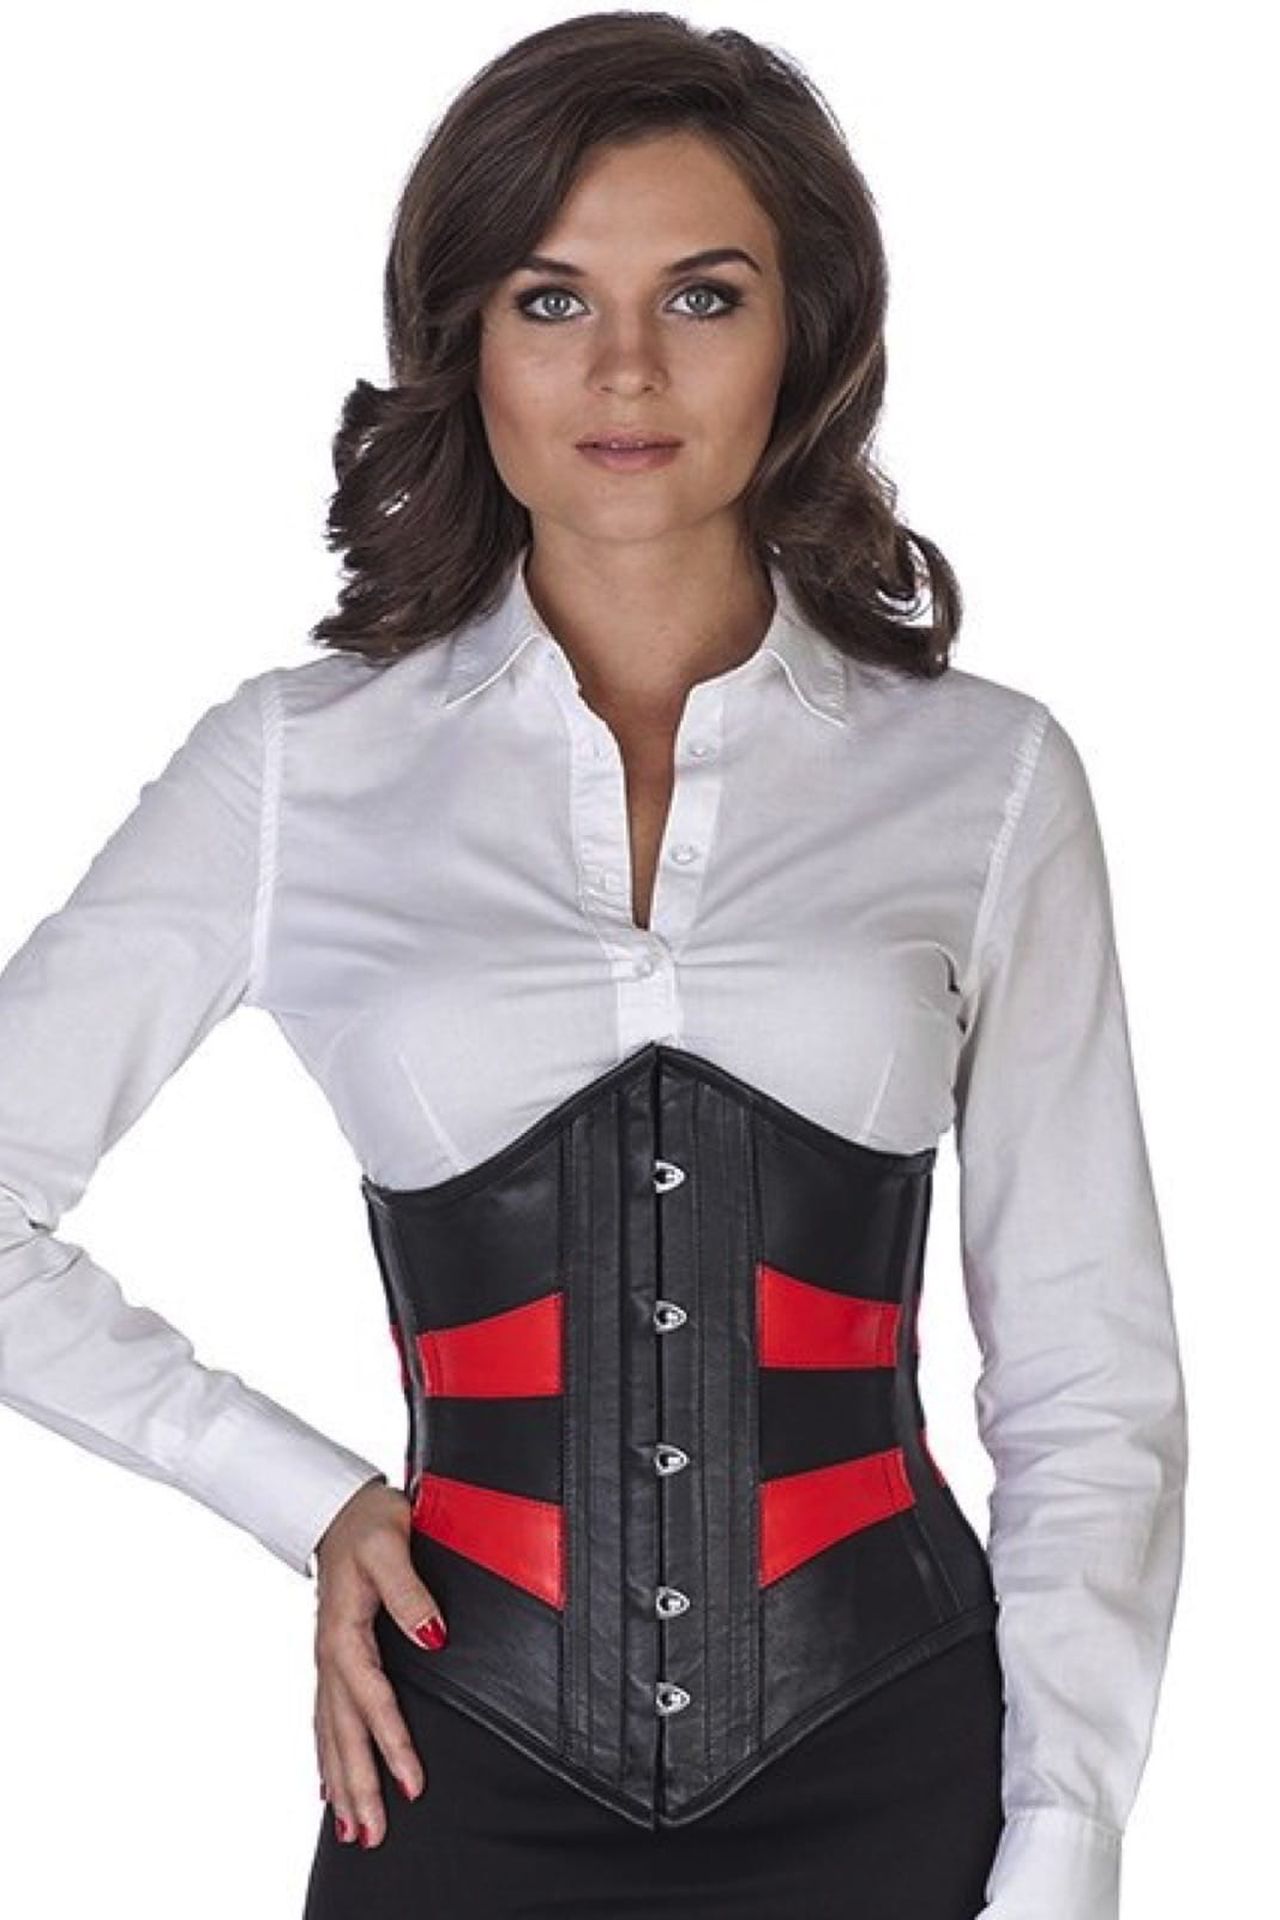 Corset red black leather underbust two color ld36